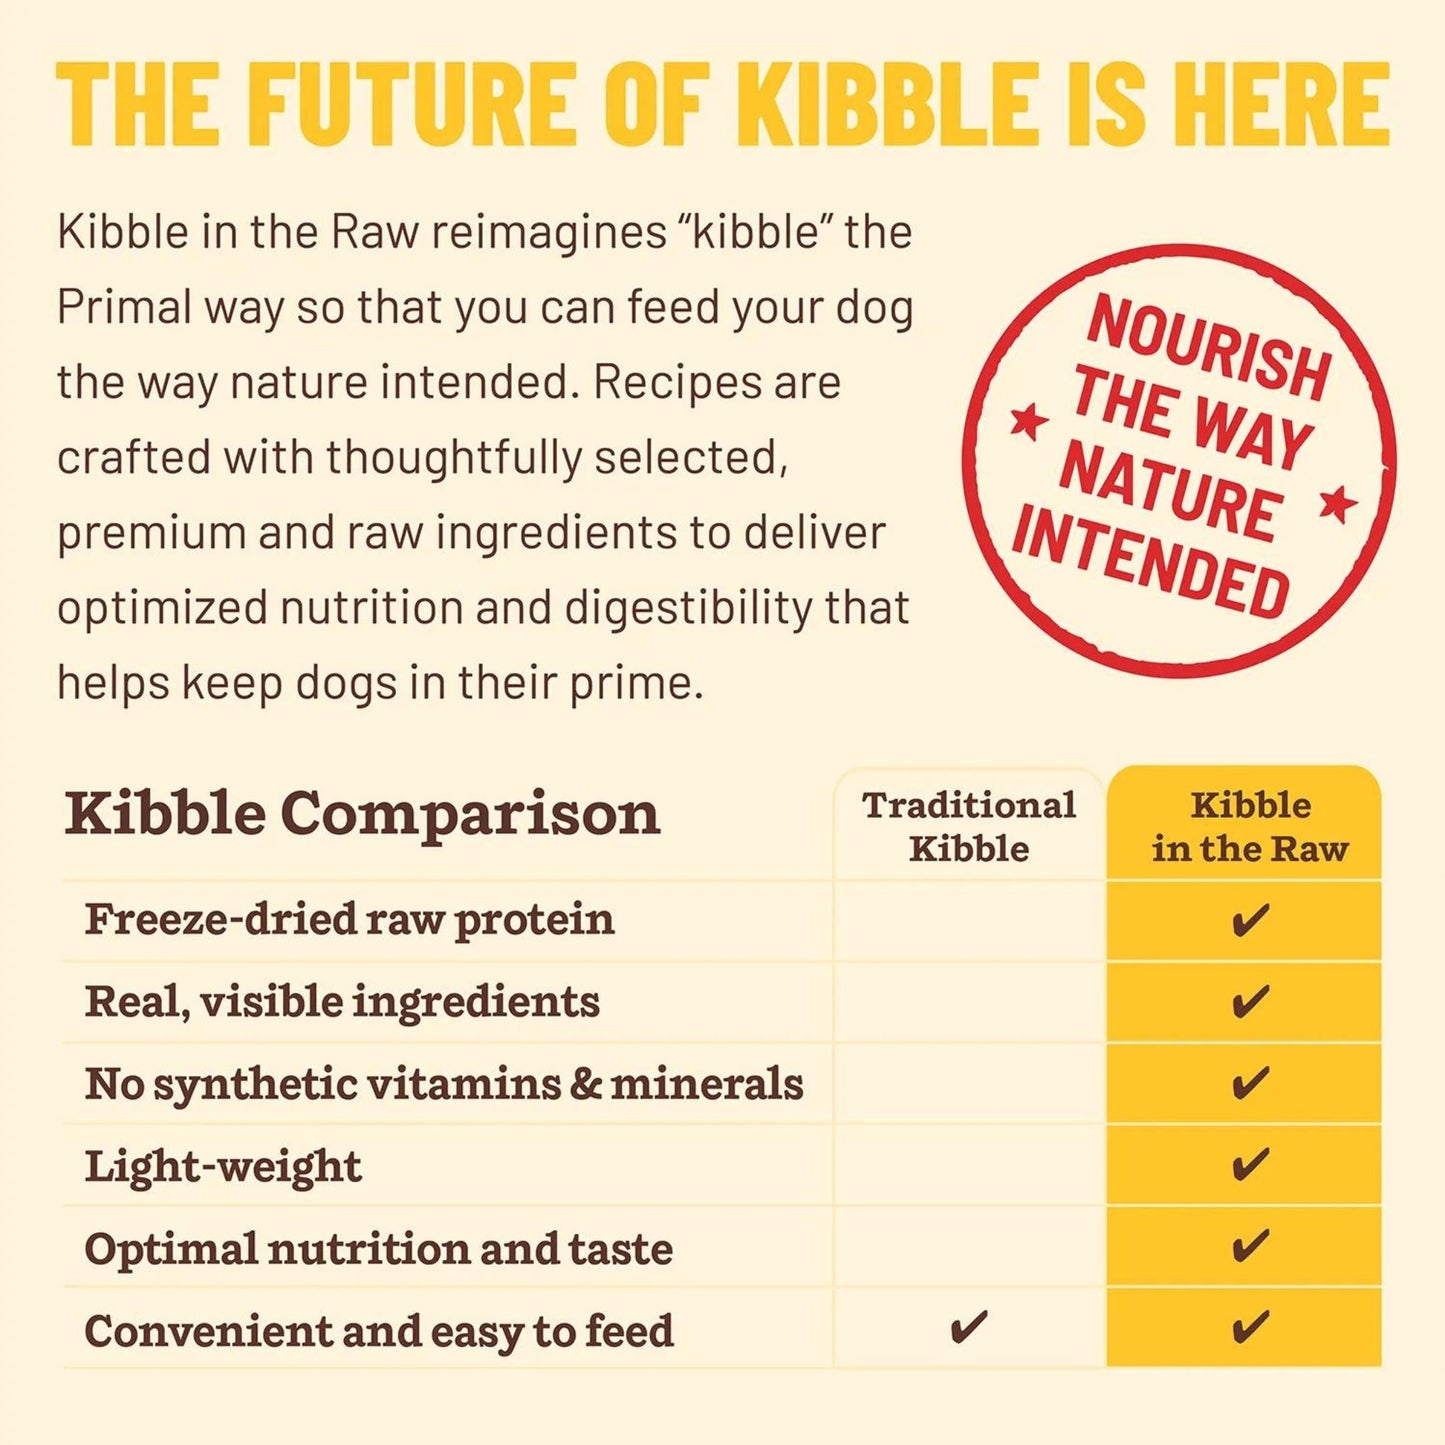 Primal Dog Freeze-Dried Kibble In The Raw Puppy 1.5Lb